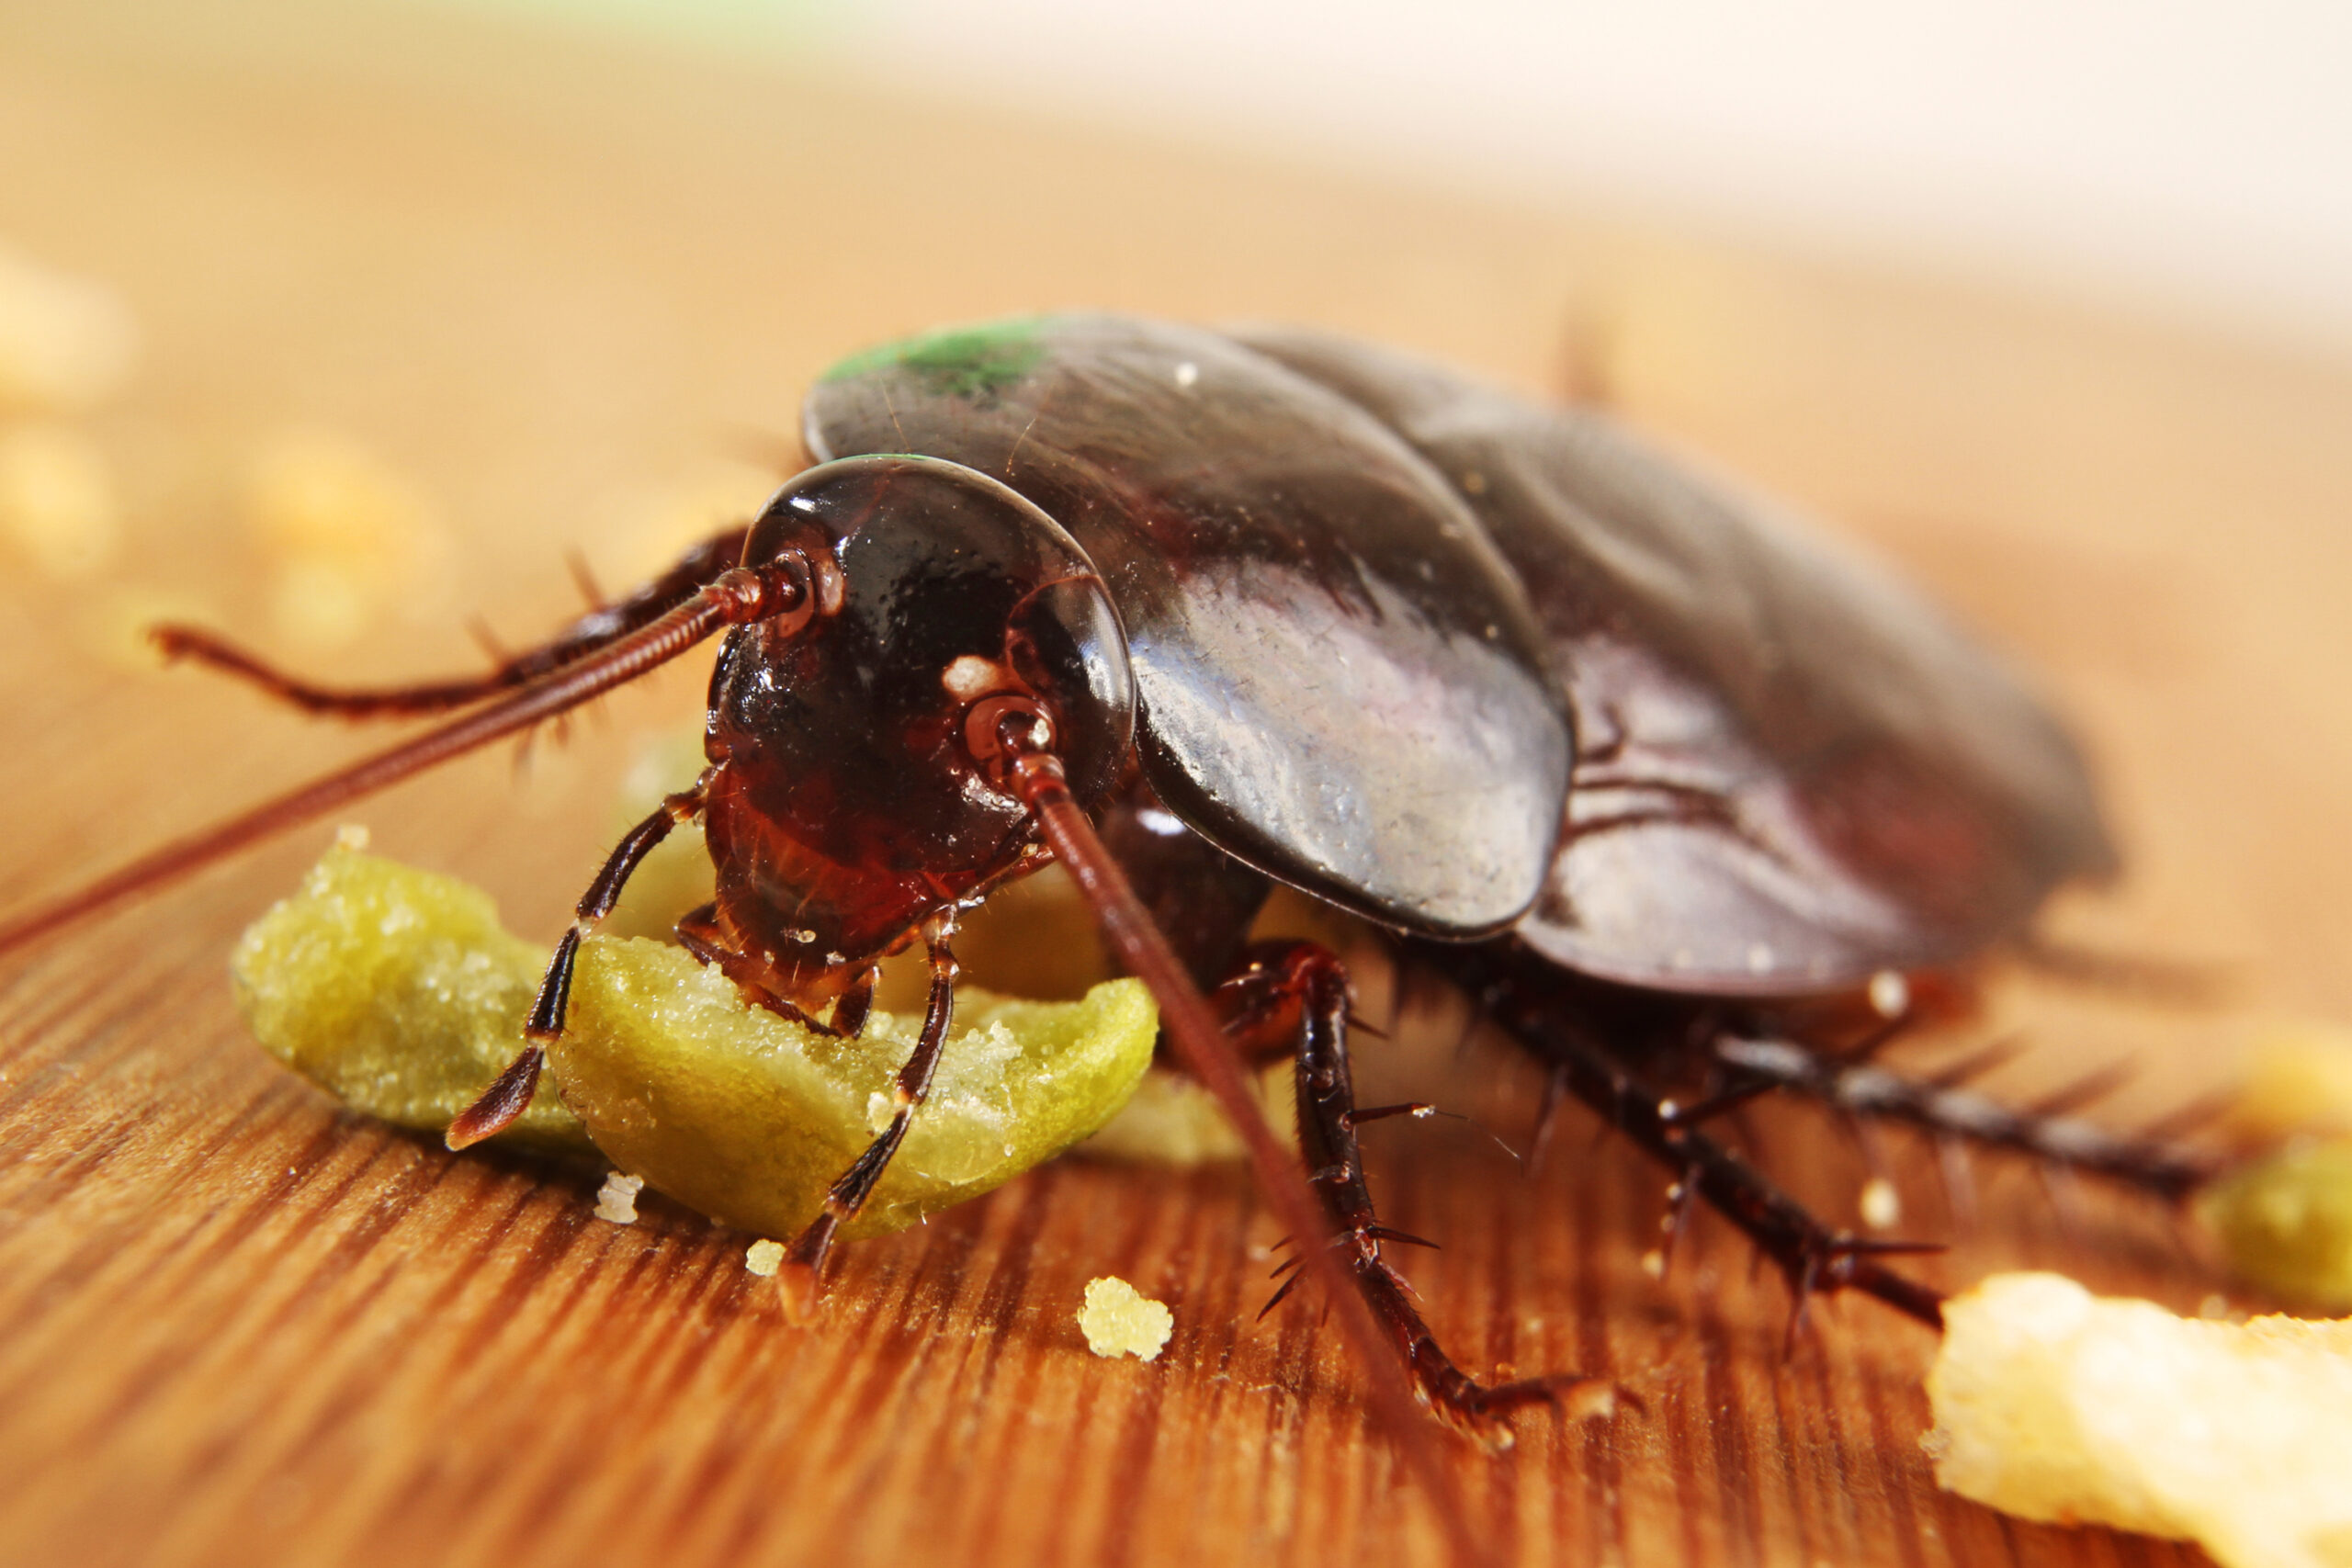 Image of cockroach eating food. Cockroach pest control.